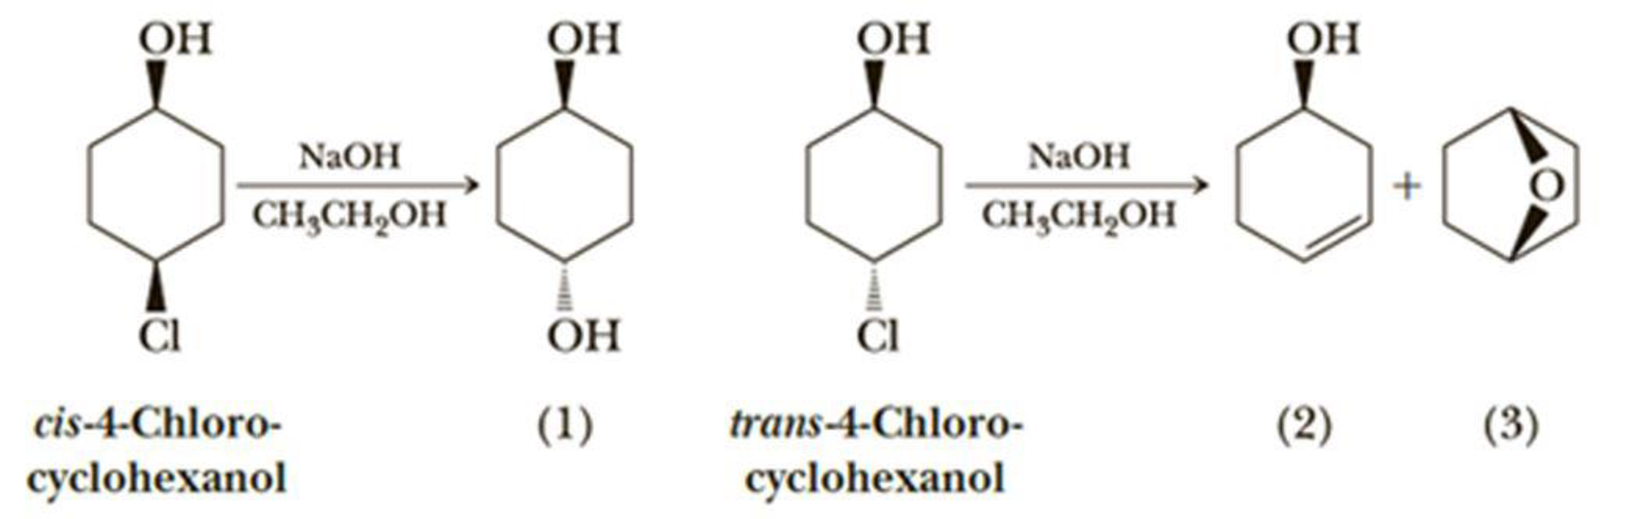 Chapter 9, Problem 9.46P, When cis-4-chlorocyclohexanol is treated with sodium hydroxide in ethanol, it gives mainly the 